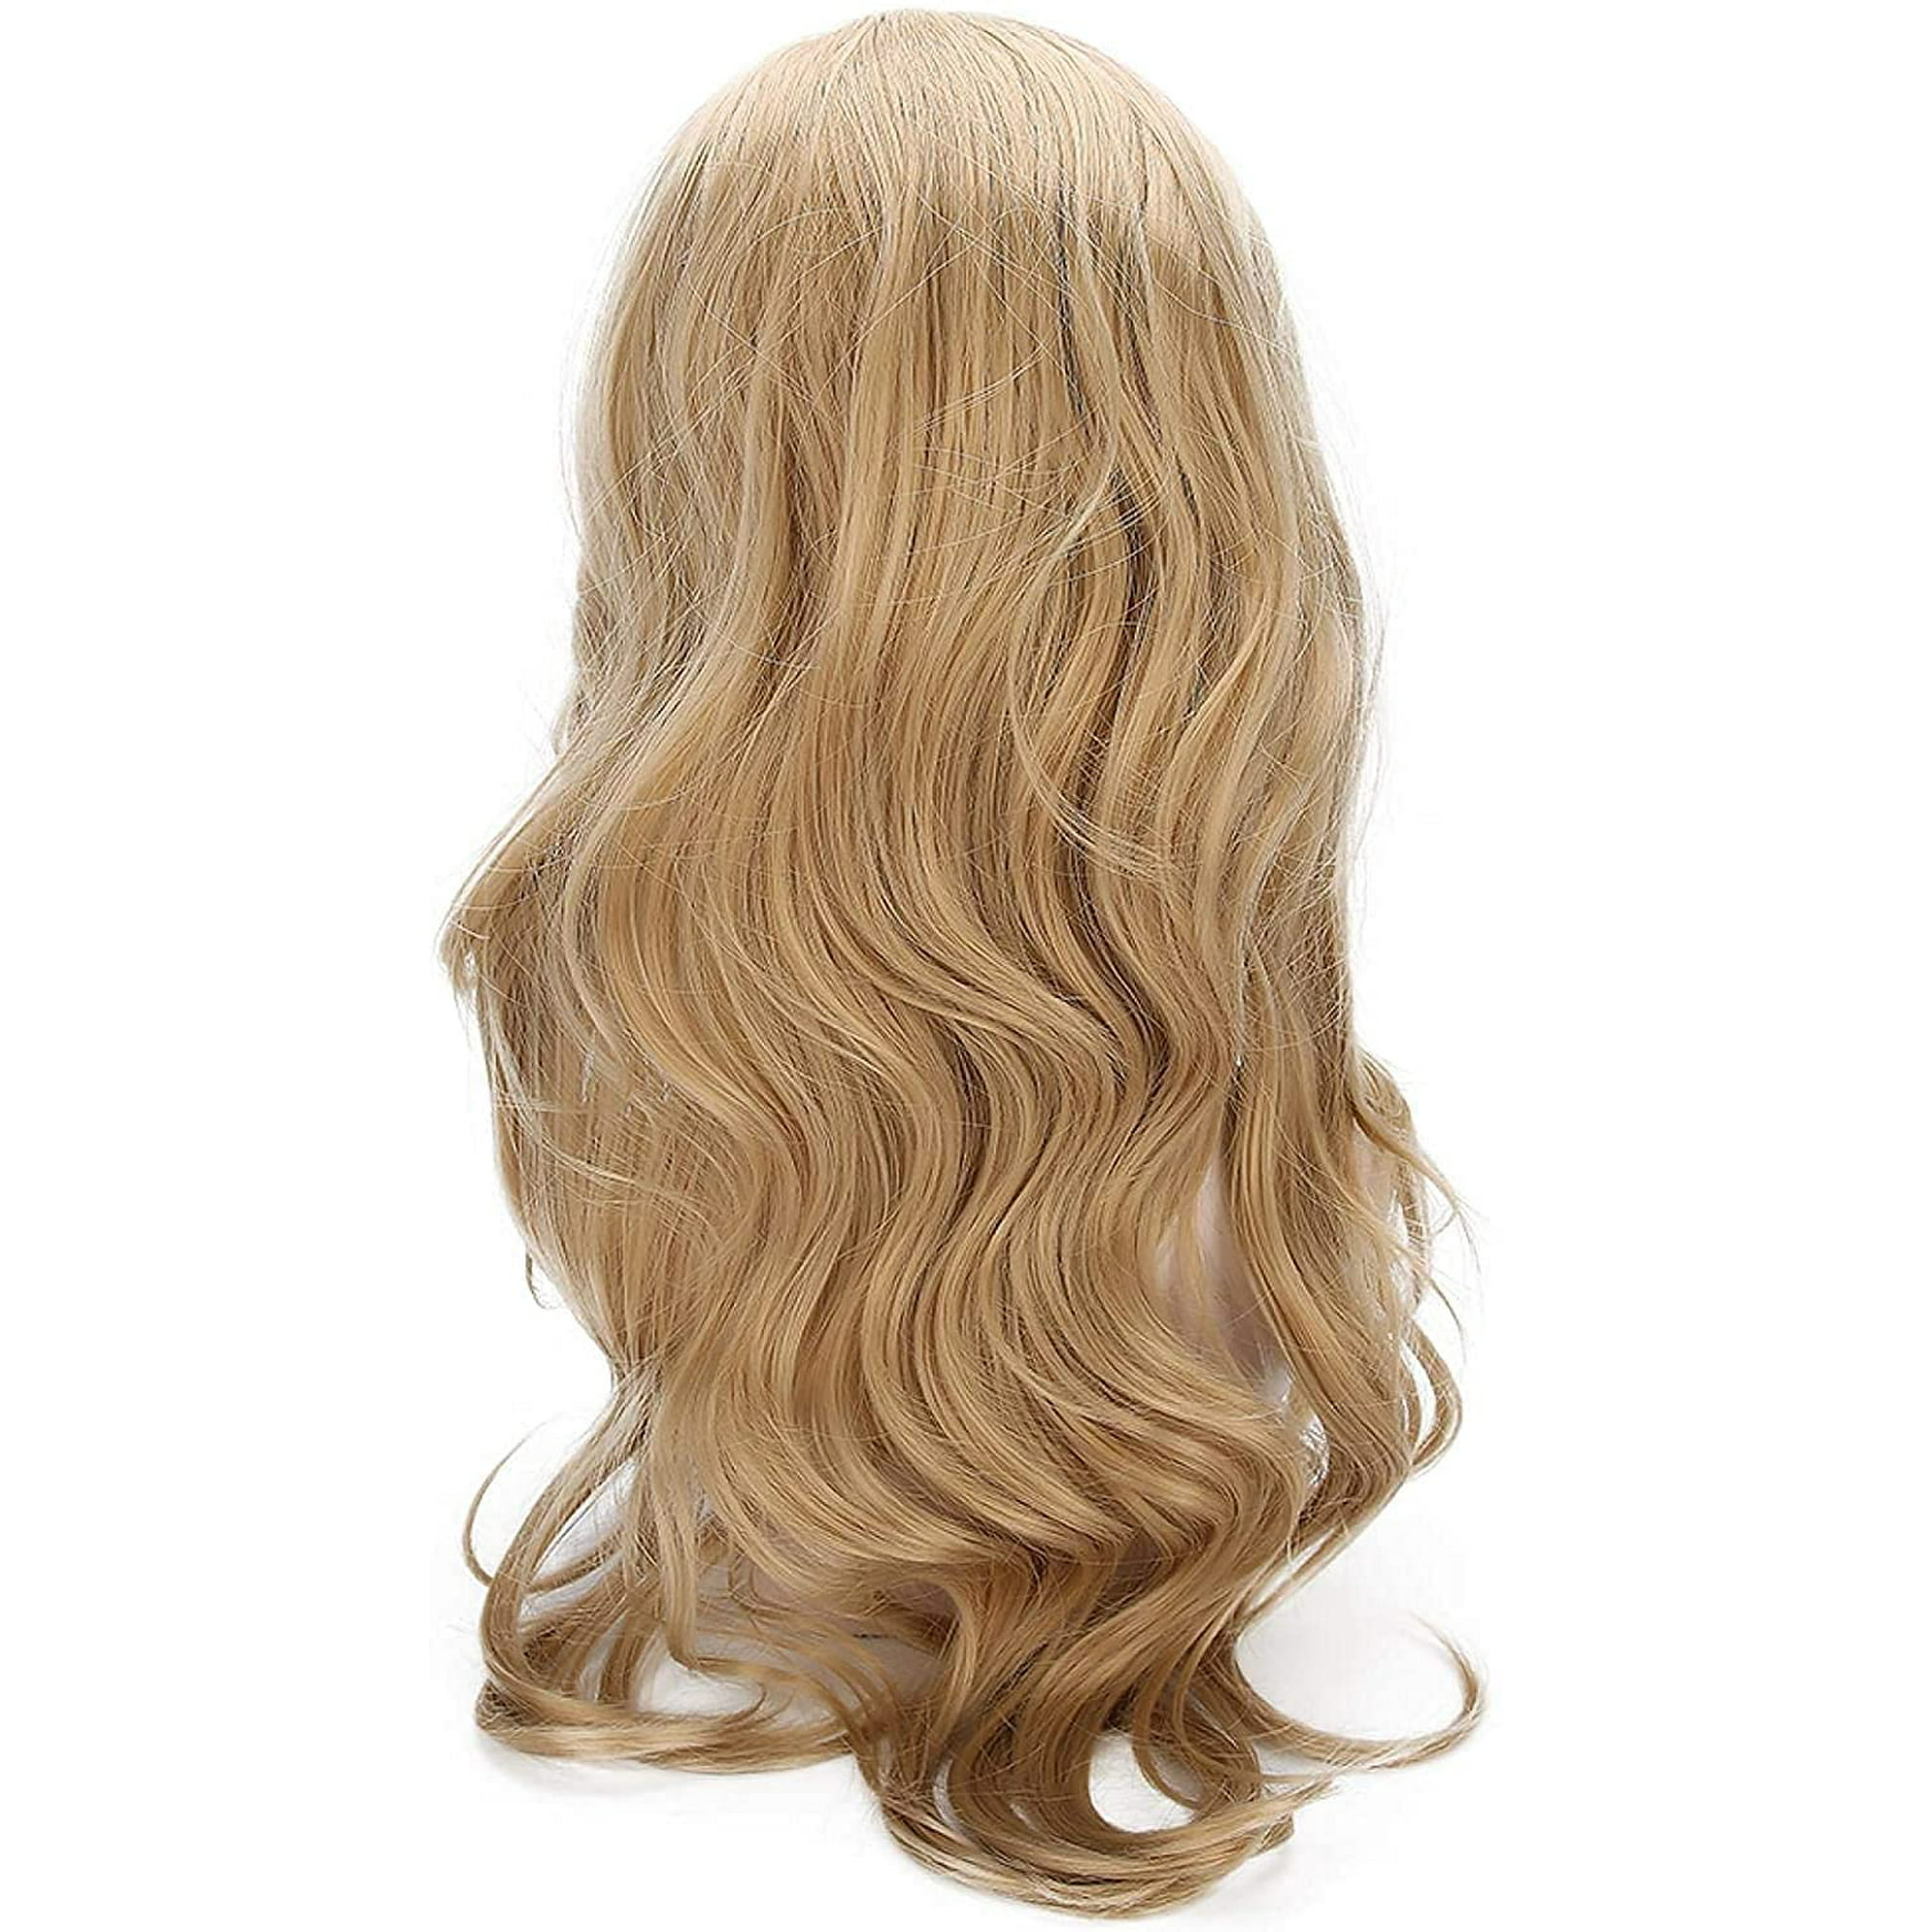 Women Hairpiece Fashionable Synthetic Hair for Hair Style Change for Daily  Use for Masquerade for Hair Salon Use | Walmart Canada